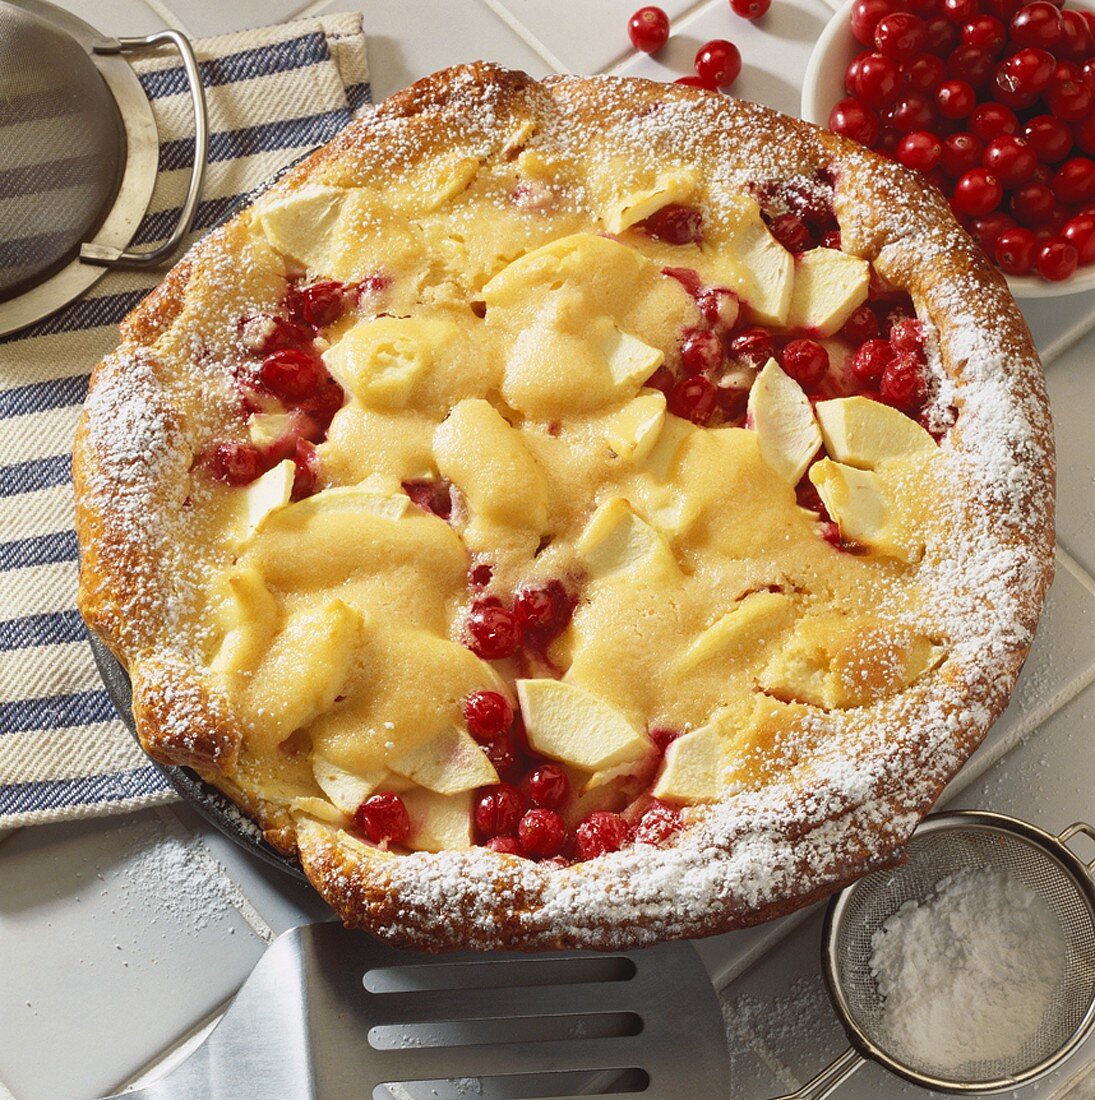 Apple and cranberry tart